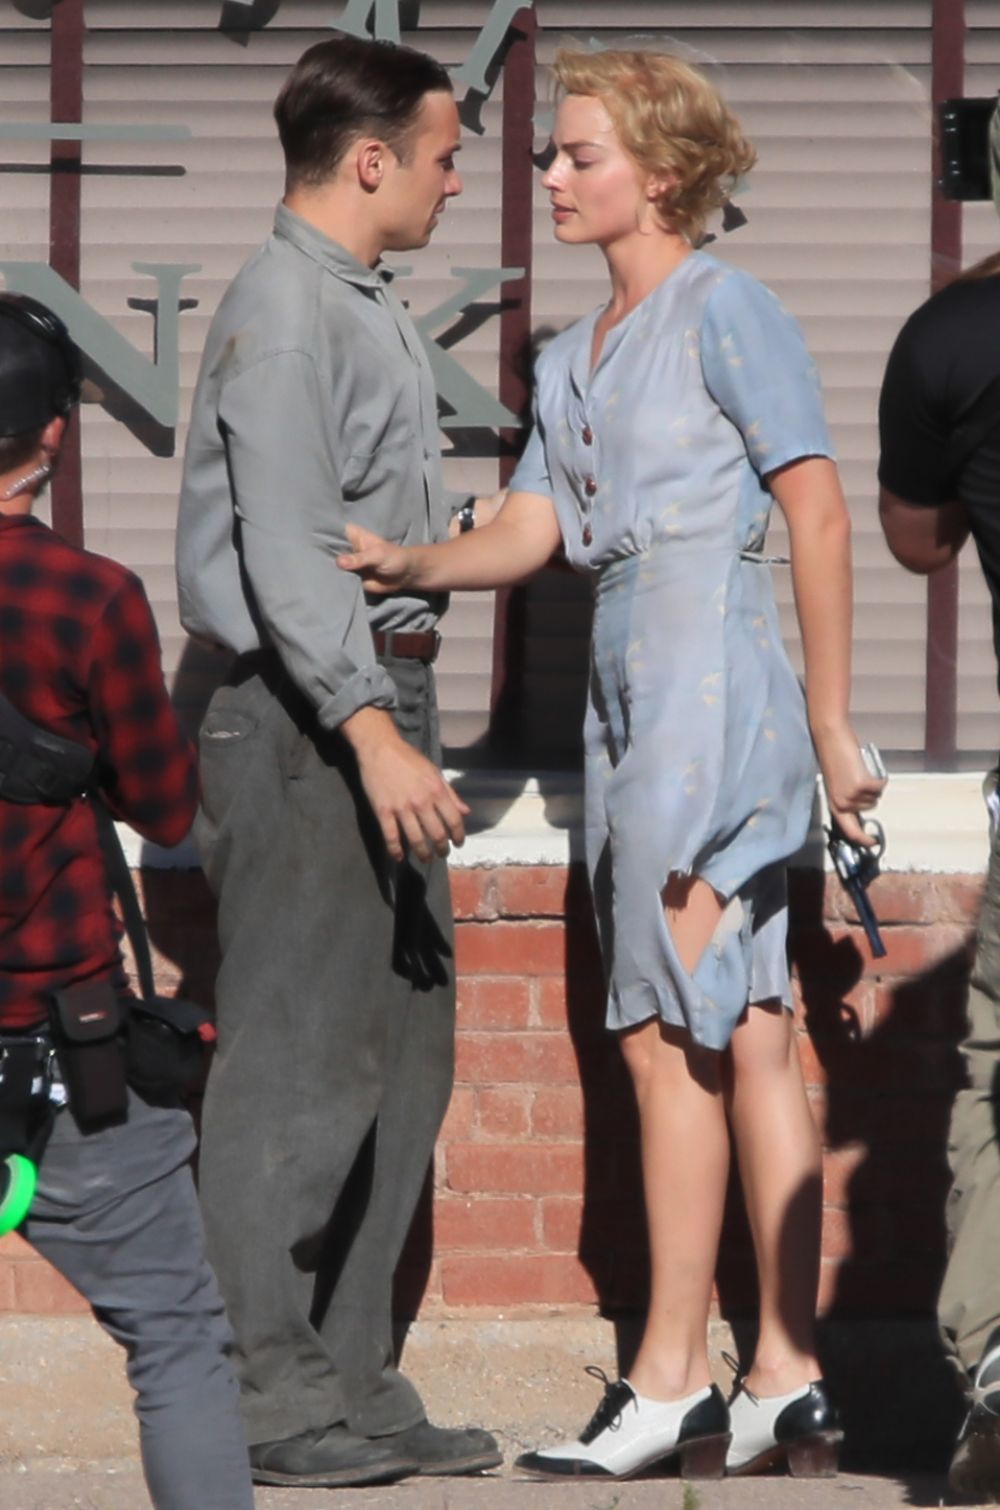 margot-robbie-on-the-set-of-dreamland-in-new-mexico-10-26-2017-5.jpg